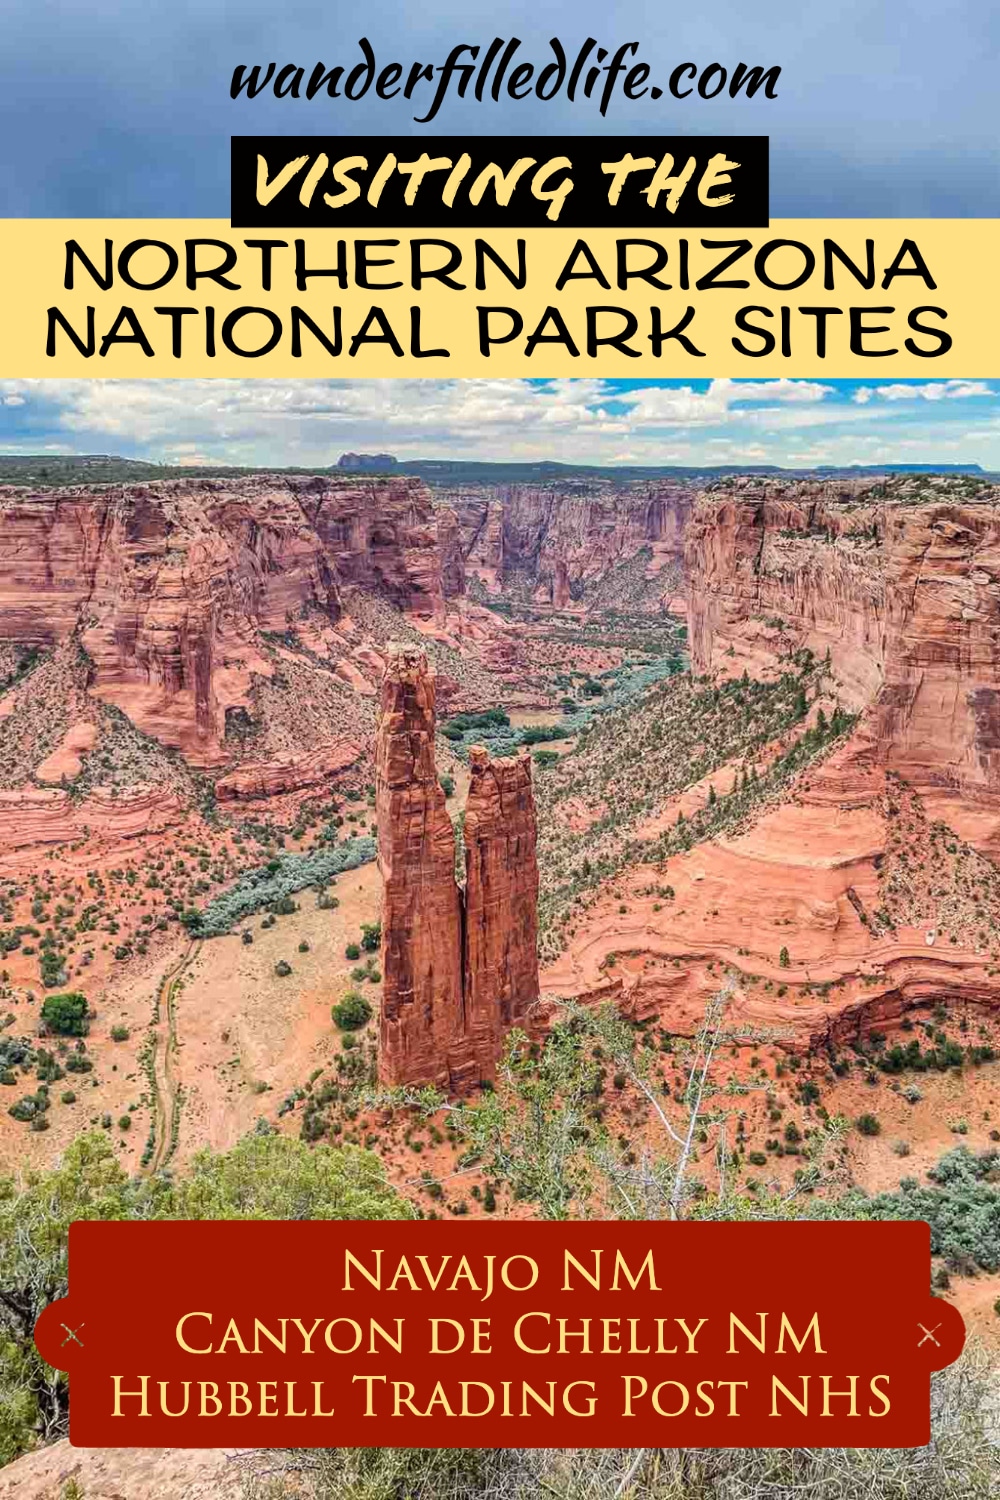 Northern Arizona is home to three excellent National Park sites, each preserving the unique cultural history and rugged beauty of the area.